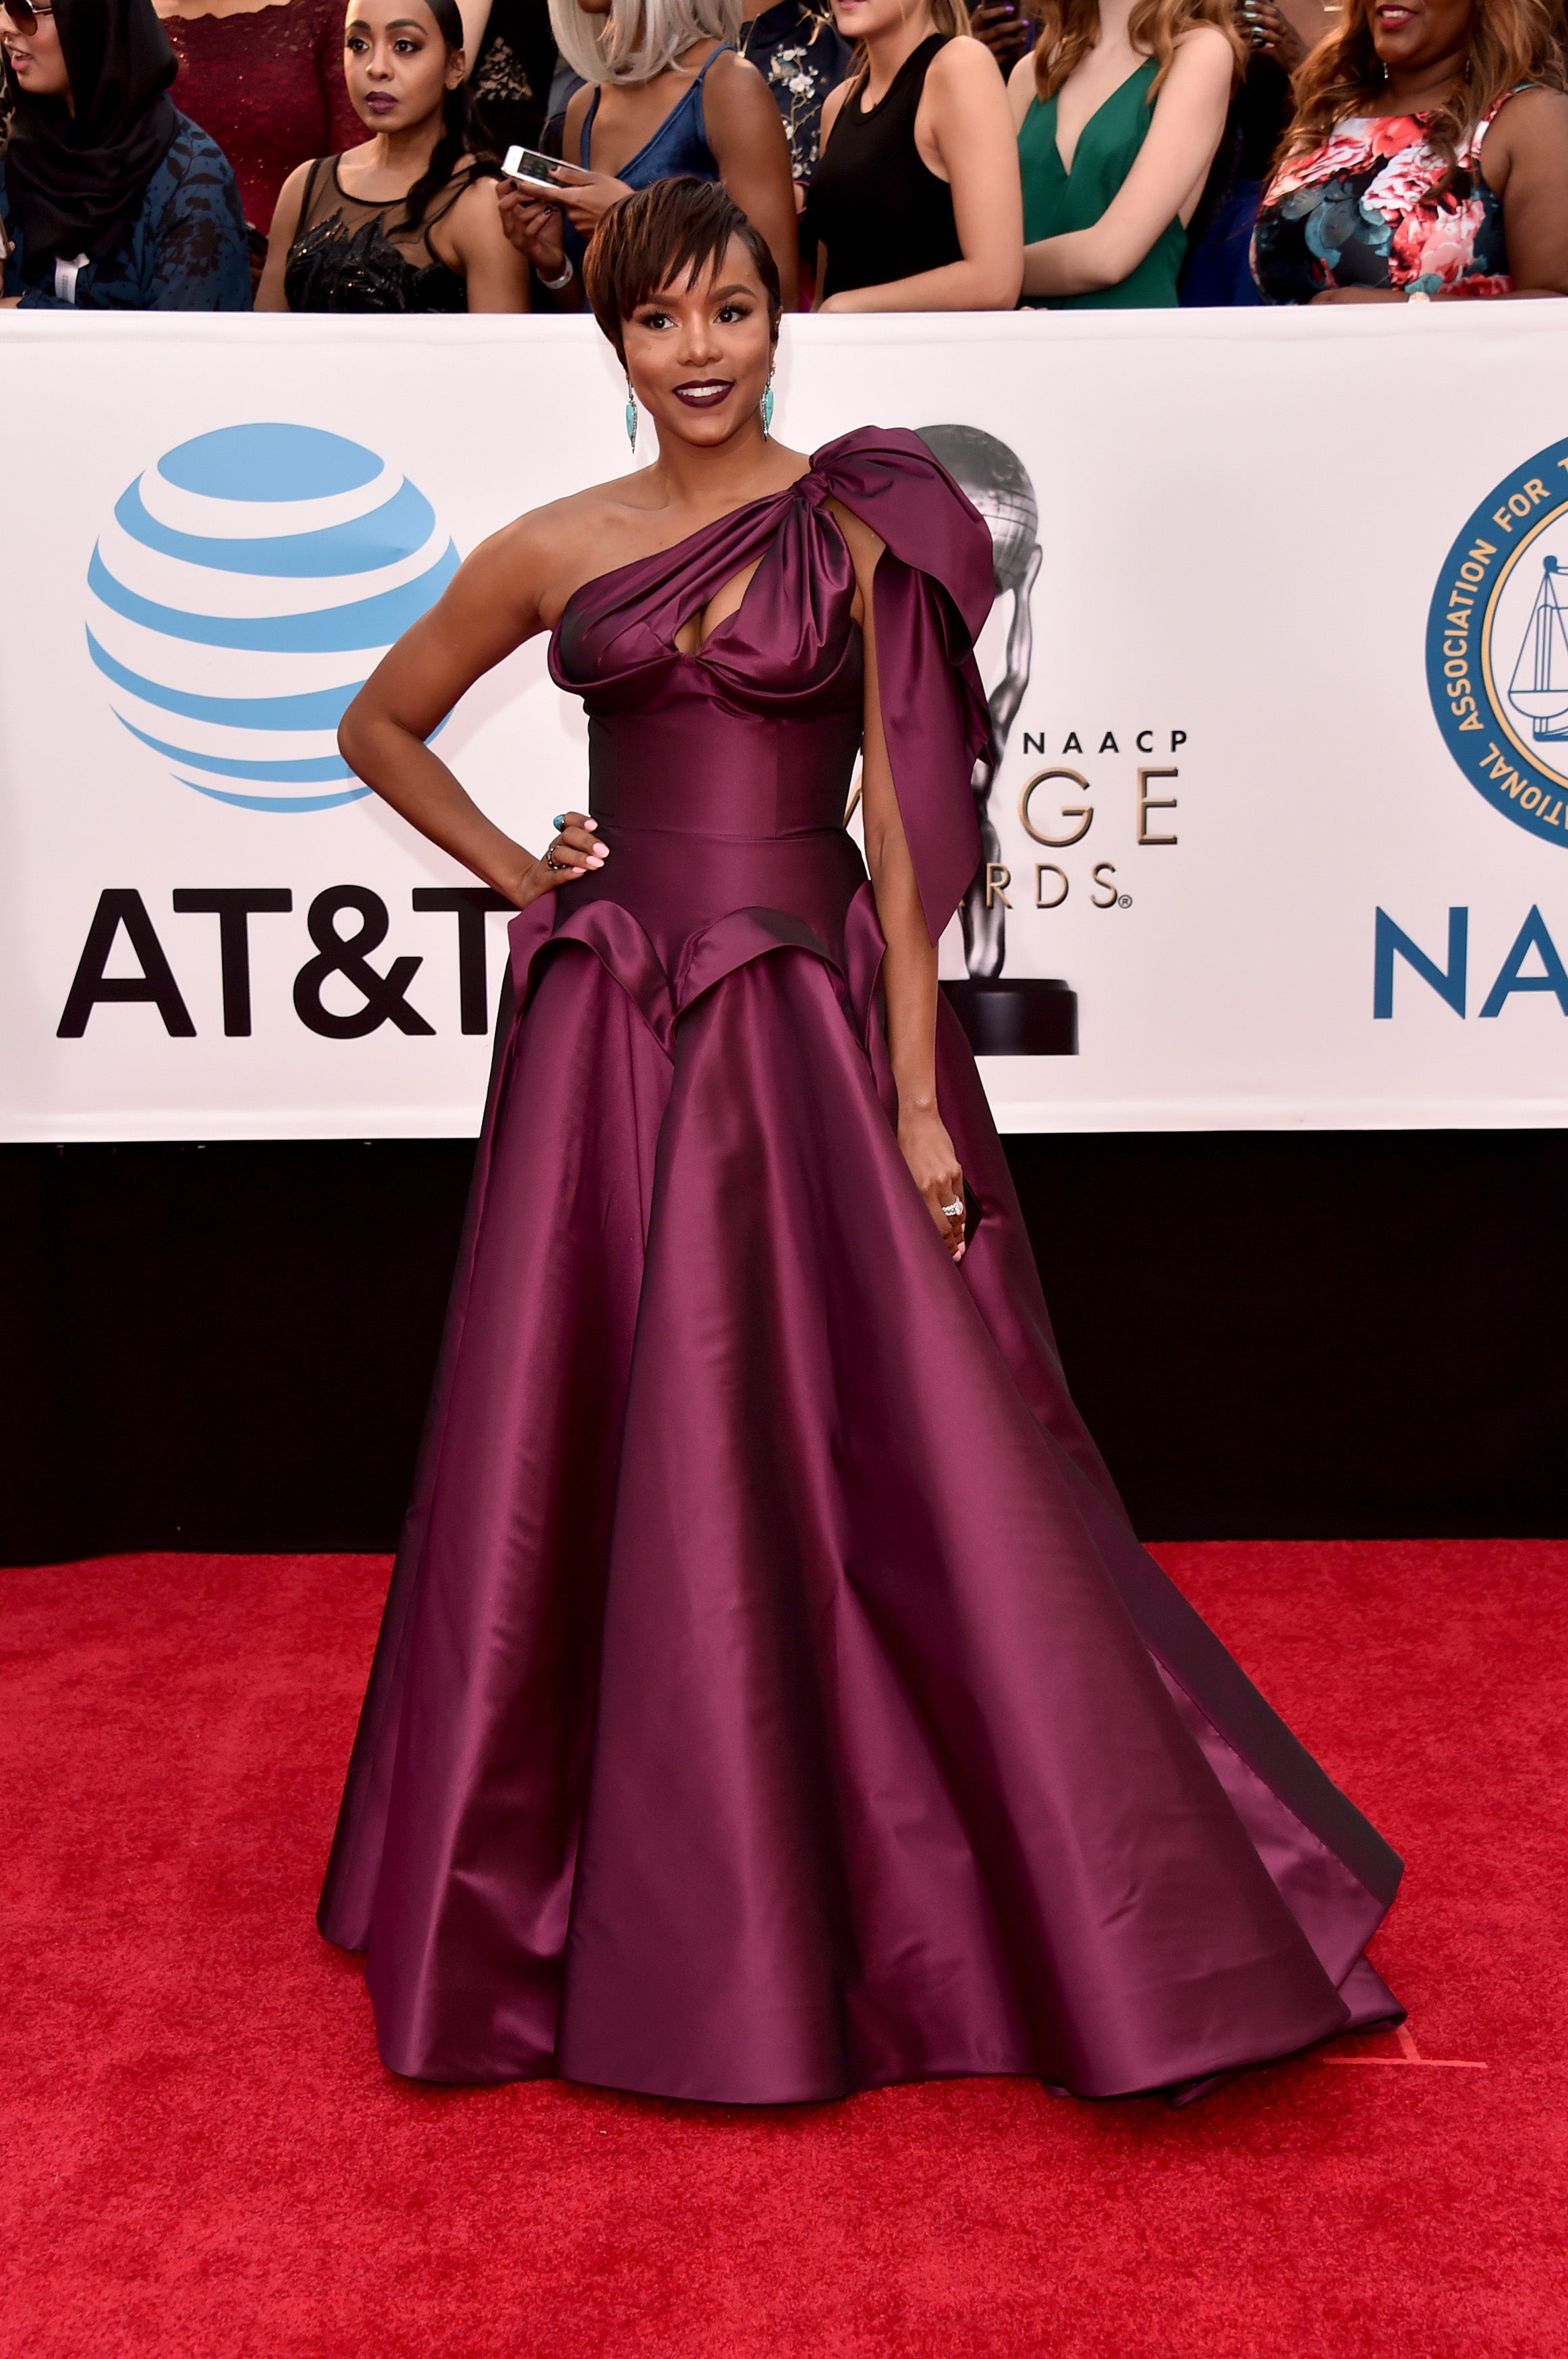 Behold Every Stunning Look From The 2018 NAACP Image Awards Red Carpet
